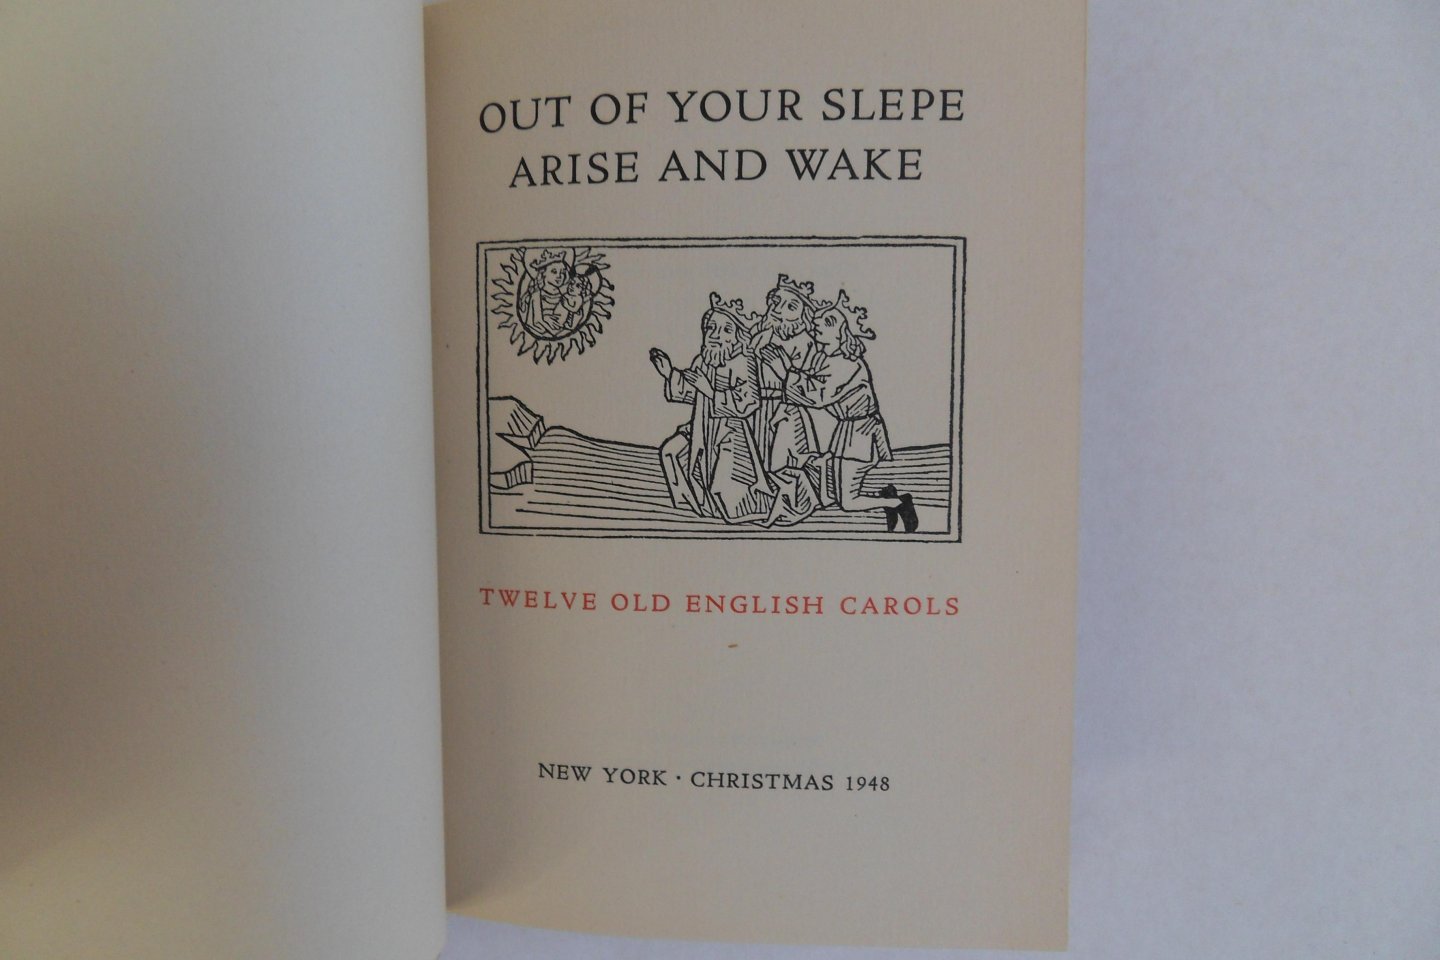 Salomon, George (edited and designed by). - Out of Your Slepe Arise and Wake. - Twelve Old English Carols.